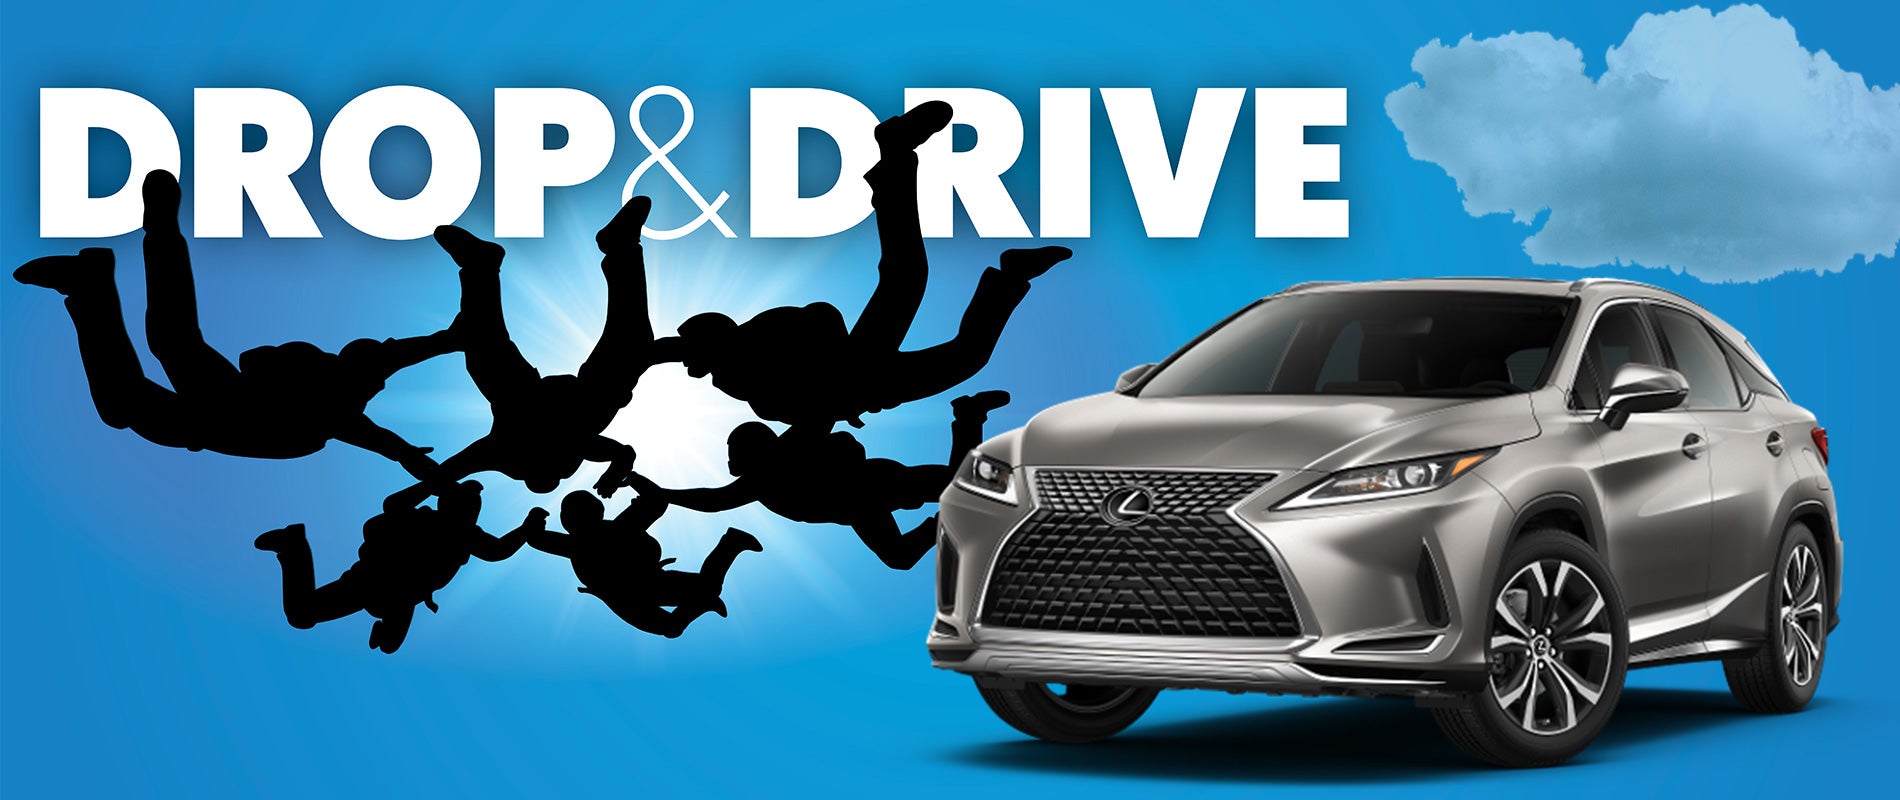 Drop & Drive - Service Offered by Scanlon Auto Group - Drive away in a complimentary loaner